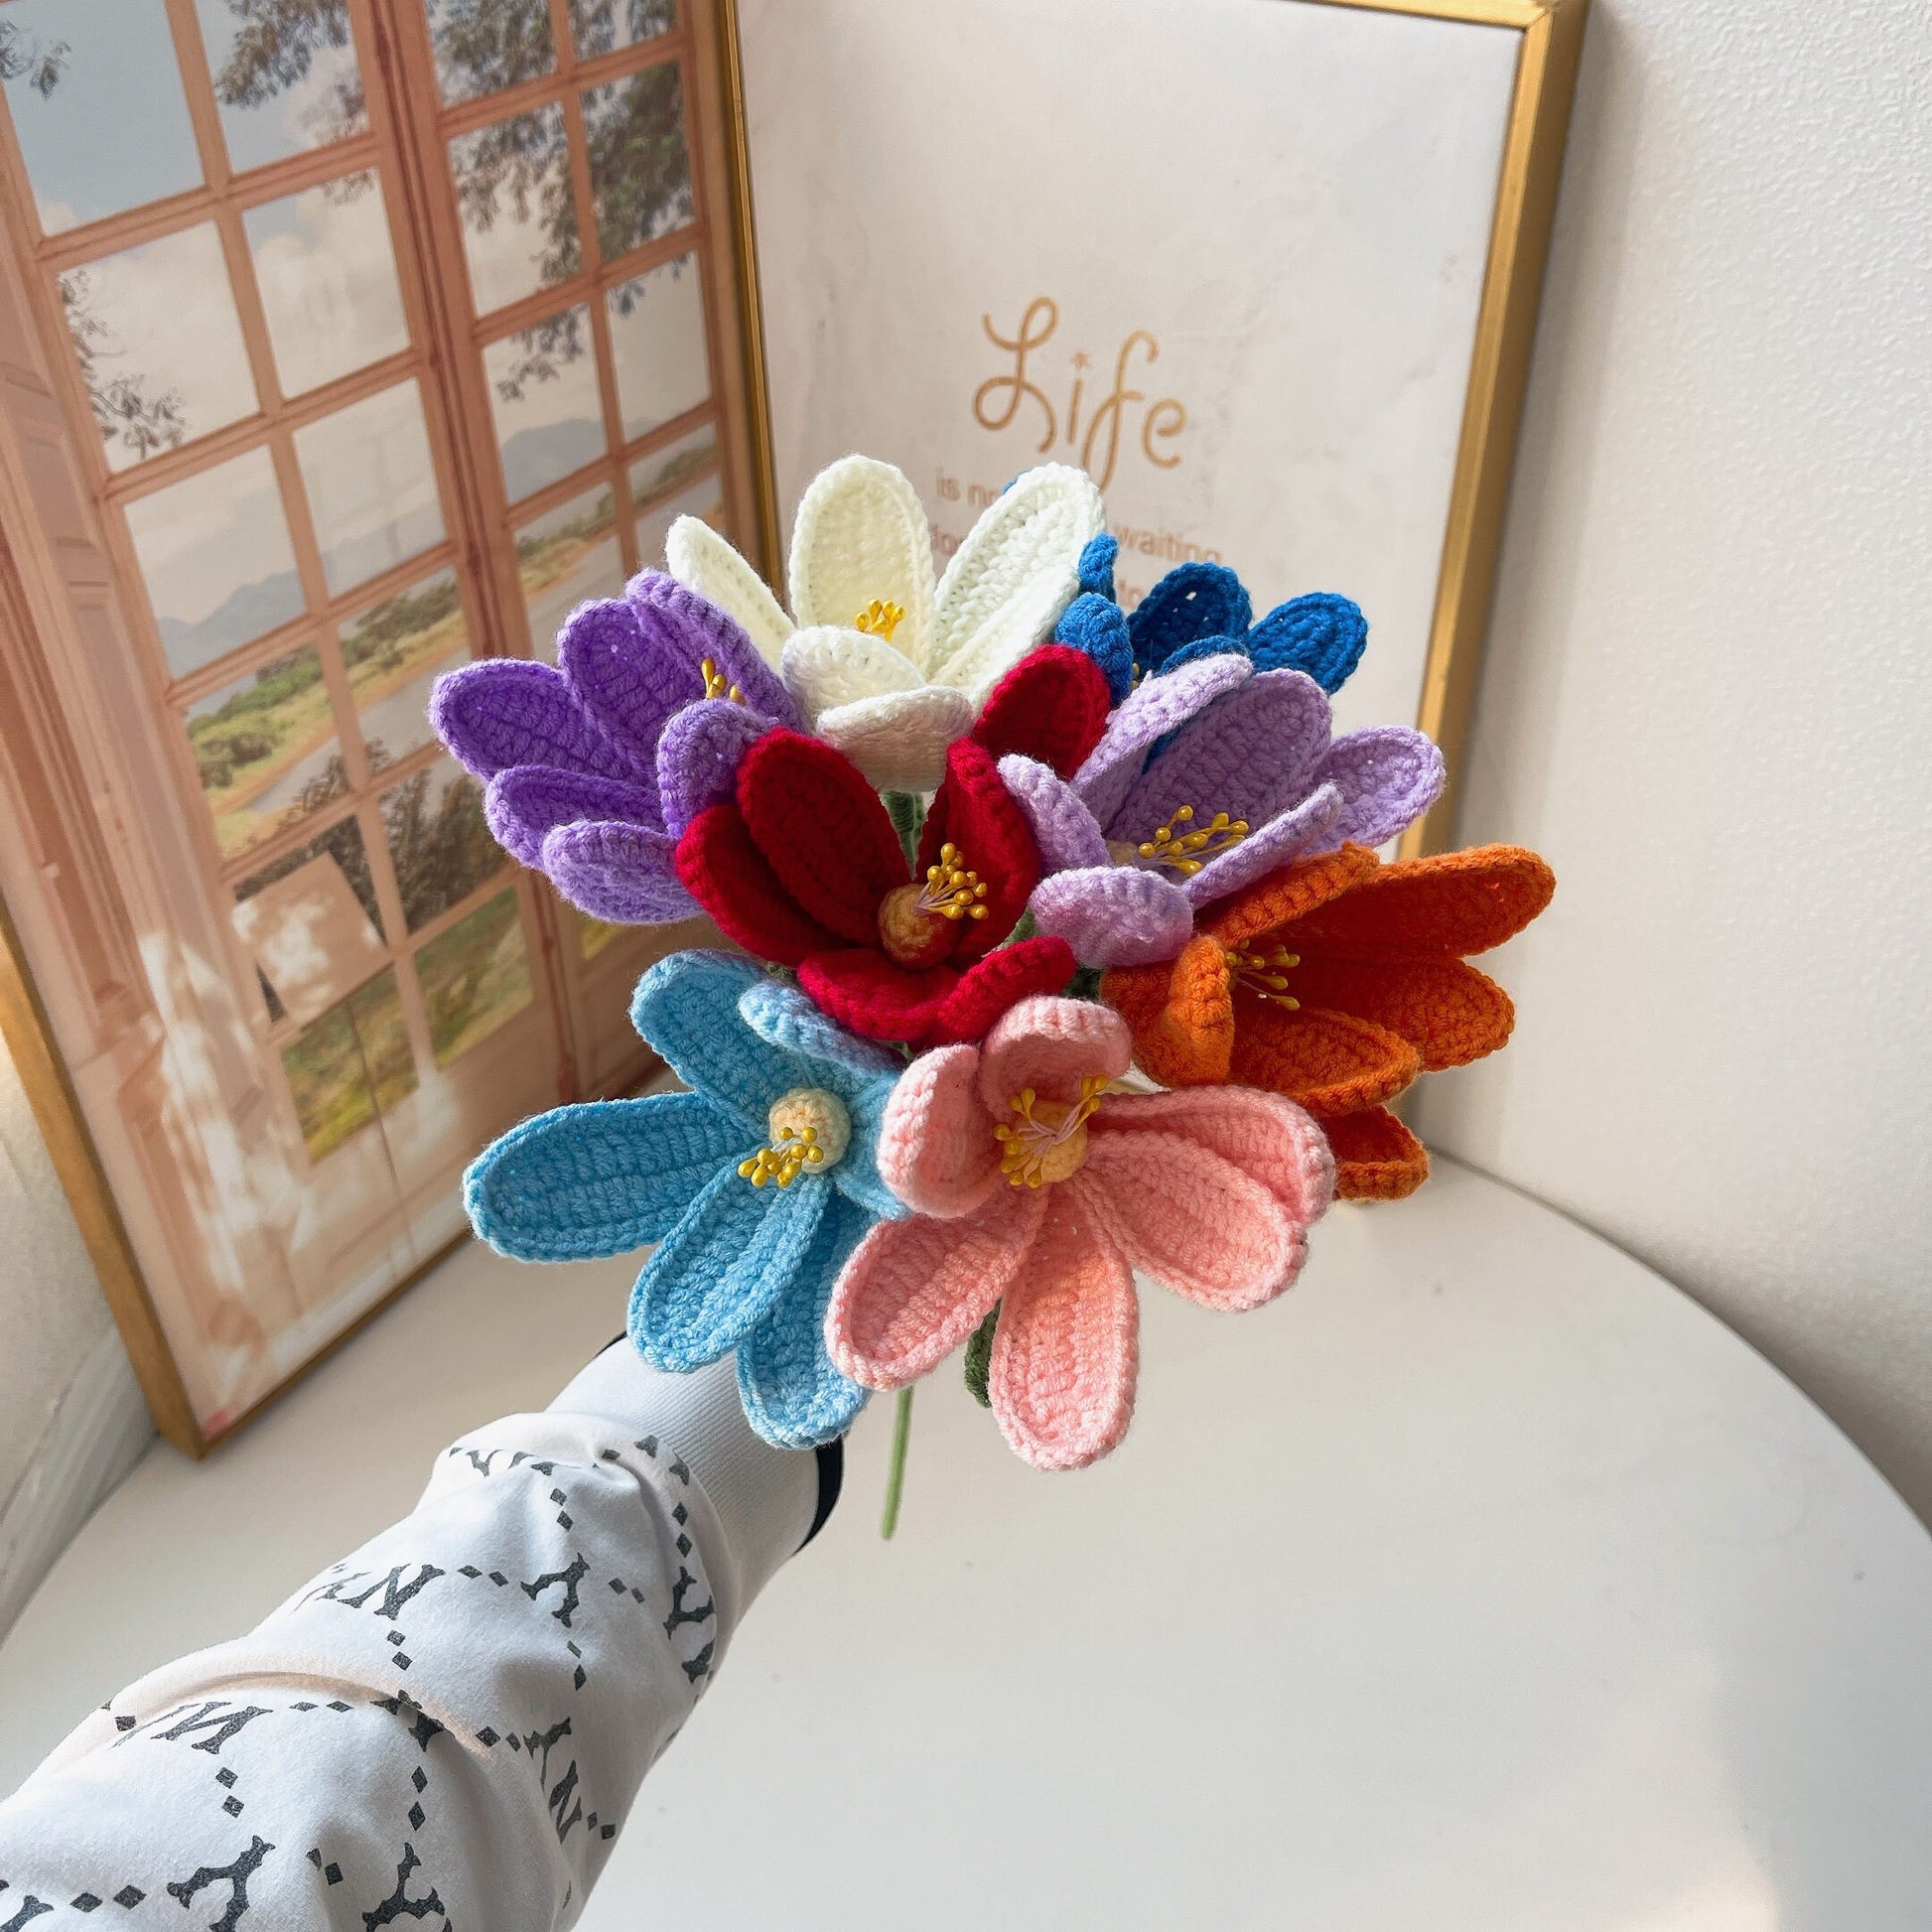 Handmade Crochet Tulip Flowers - Yarn Crafted, Home Decor, Gift Idea, Floral Arrangement, Symbolic Flower, Floral Accents, Bouquet Flowers